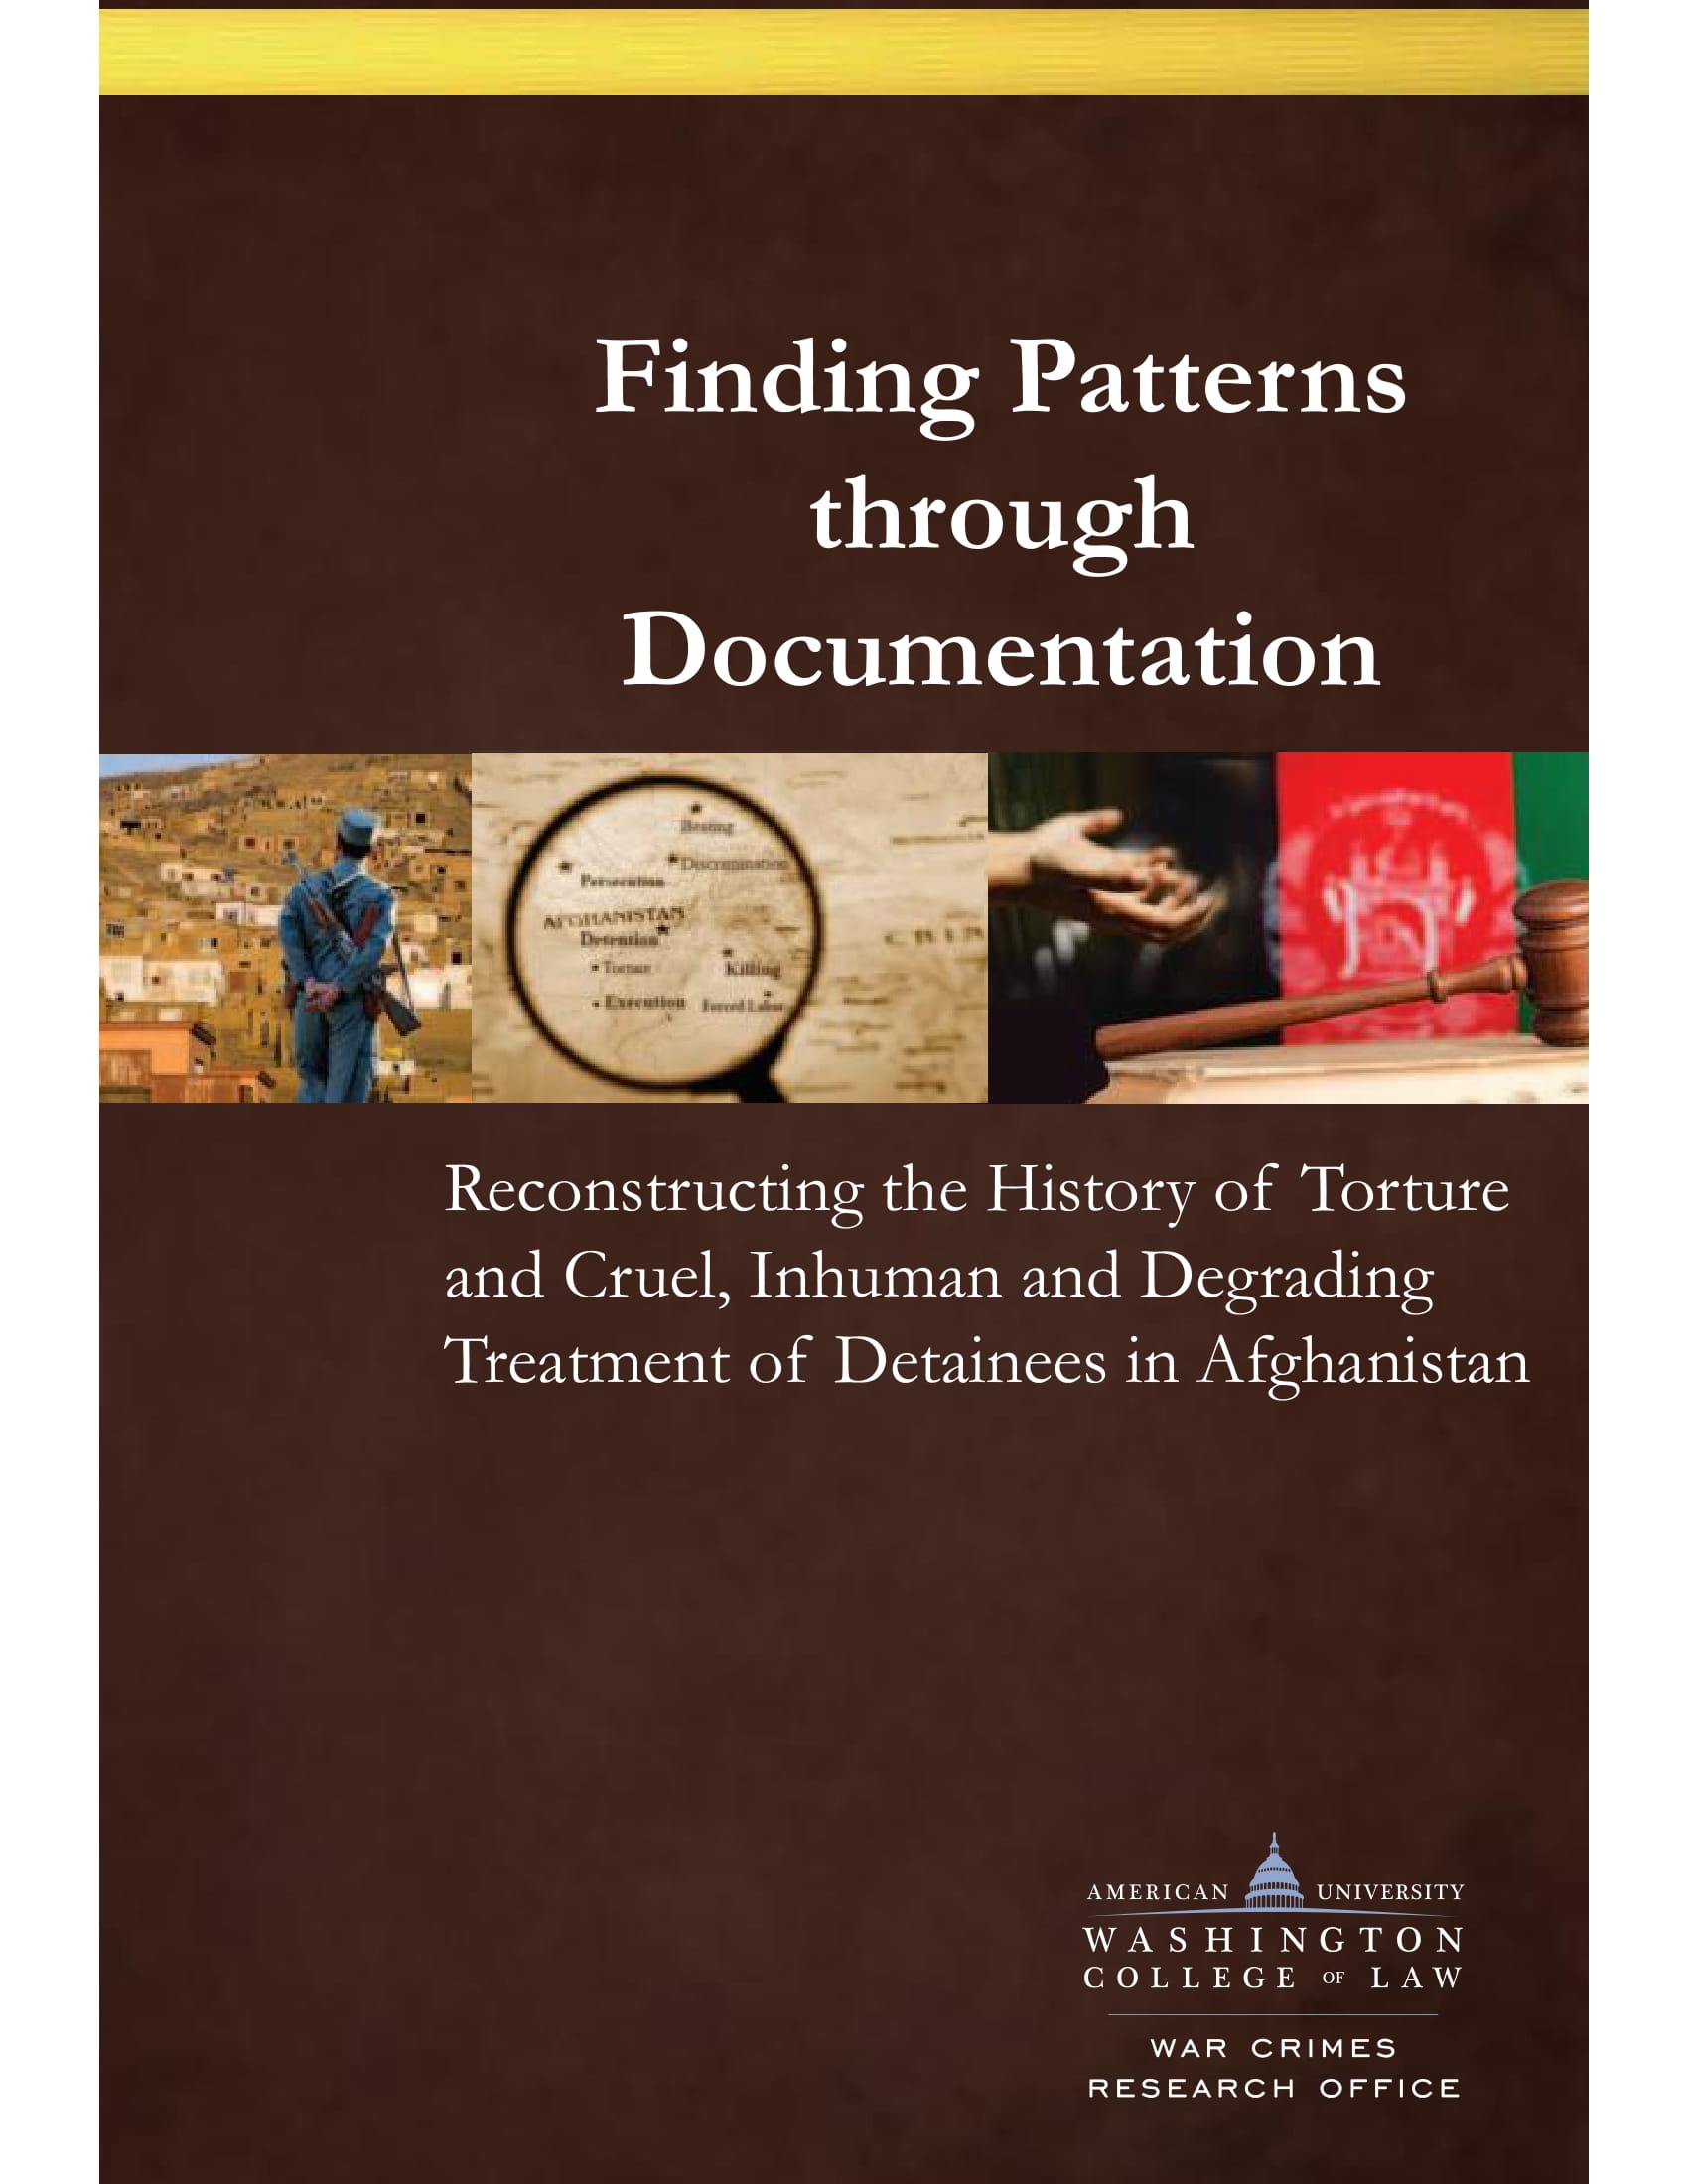 Finding Patterns through Documentation: Reconstructing the History of Torture and Cruel, Inhuman and Degrading Treatment of Detainees in Afghanistan (English)